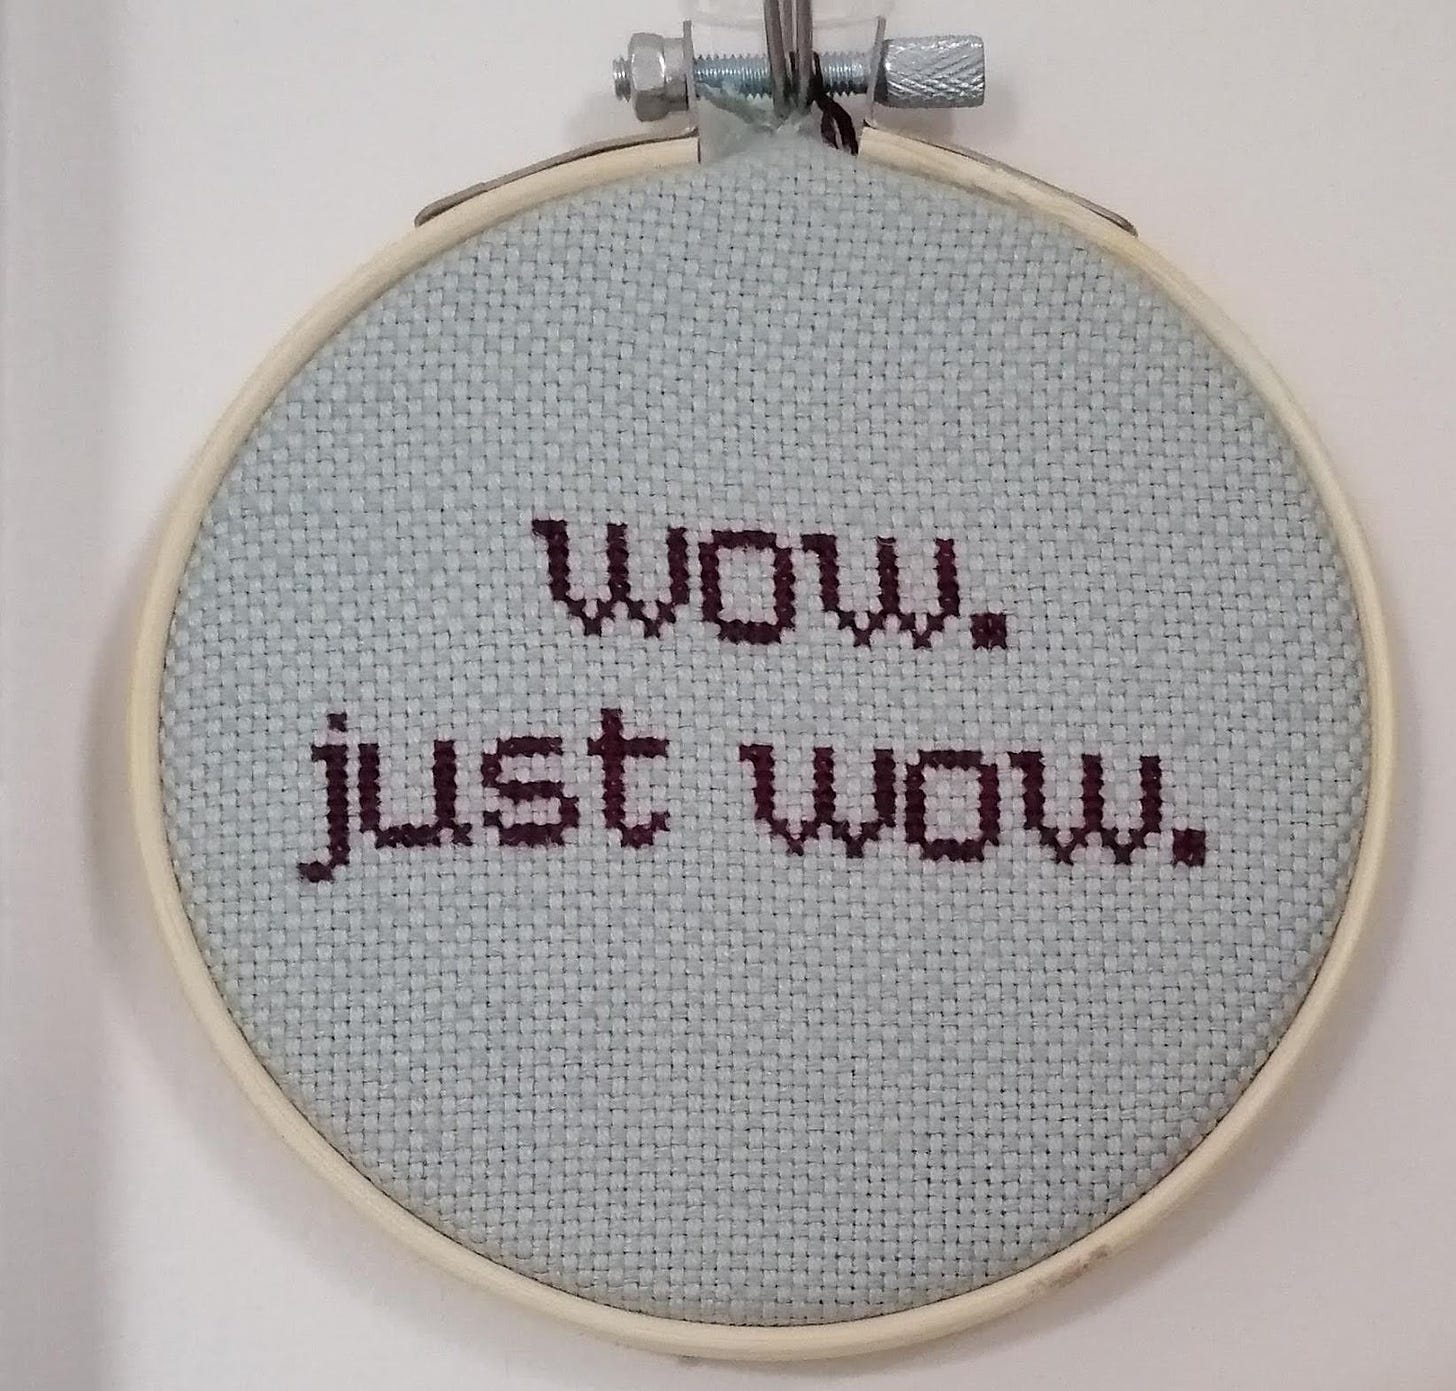 Cross stitch in a hoop. Text reads "wow. just wow."